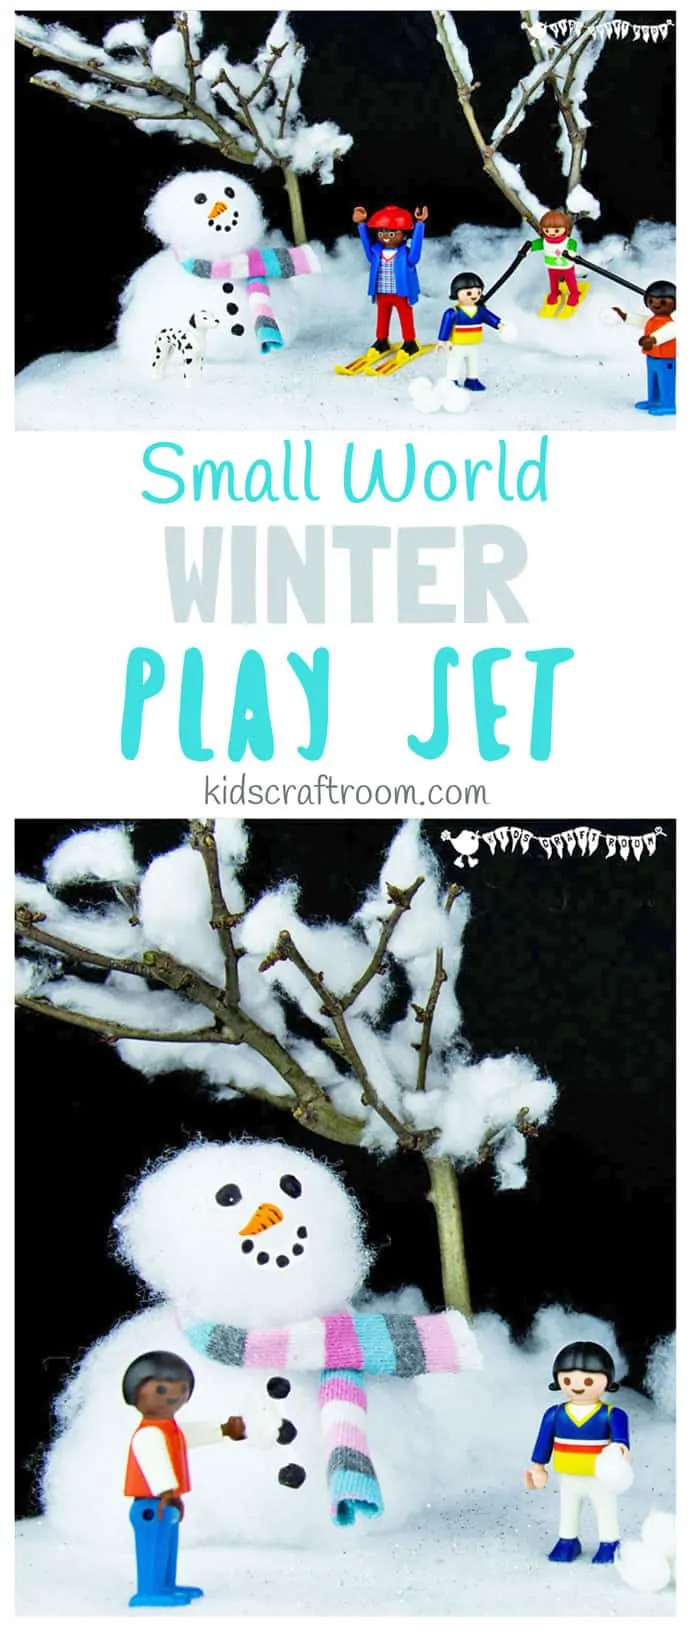 SMALL WORLD WINTER PLAY SET - Make an easy small world snow scene for kids to explore the fun and magic of Winter and snow again and again. A fun Winter craft for kids that encourages imaginative play. #Winter #snow #wintercrafts #wintercraftsforkids #wintercraftideas #winteractivities #smallworld #play #playideas #kidscraftroom